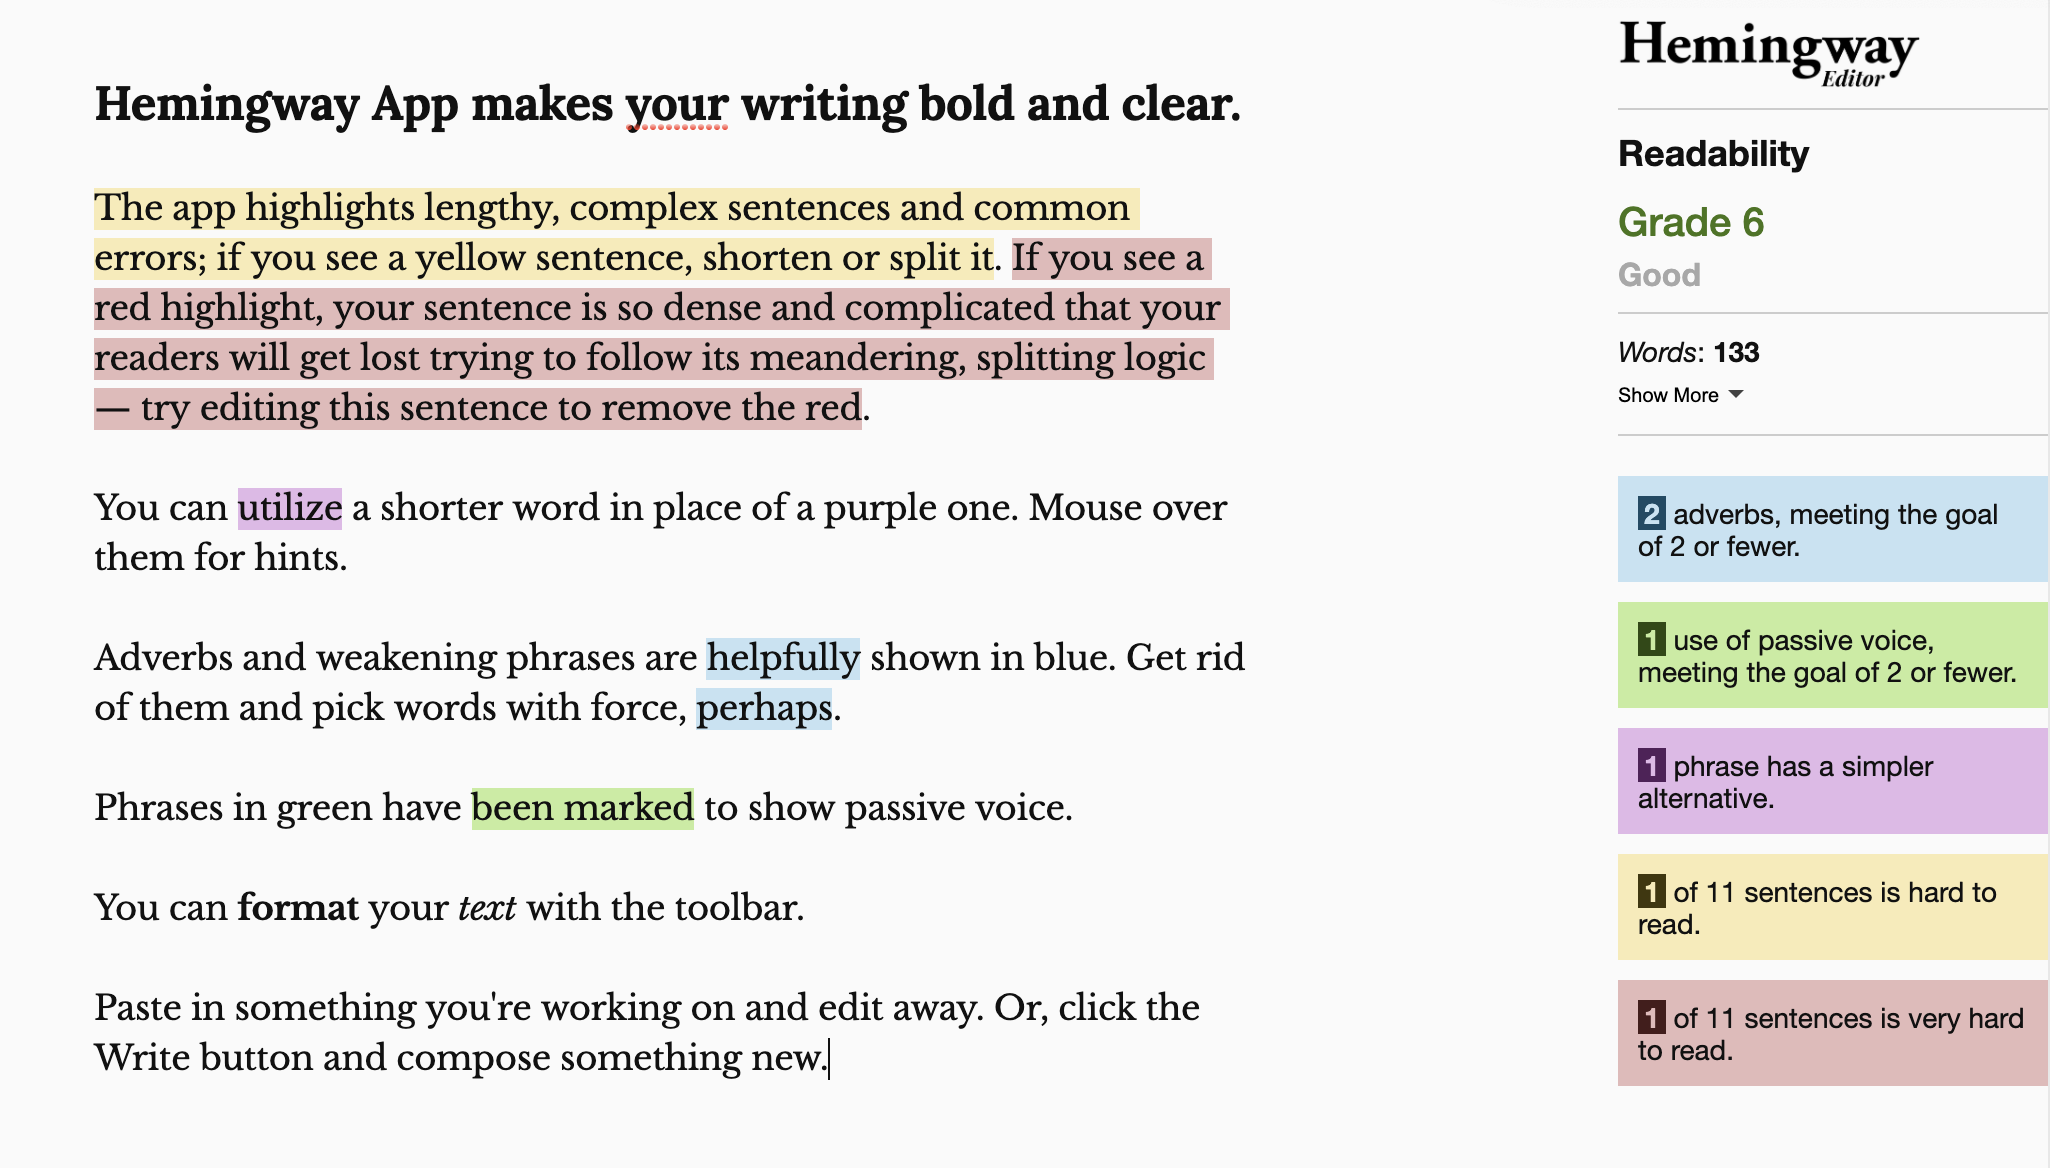 Screencap of Hemingway Editor's Features. Parts of a paragraph are highlighted to show adverbs, passive voice, and difficult wording.